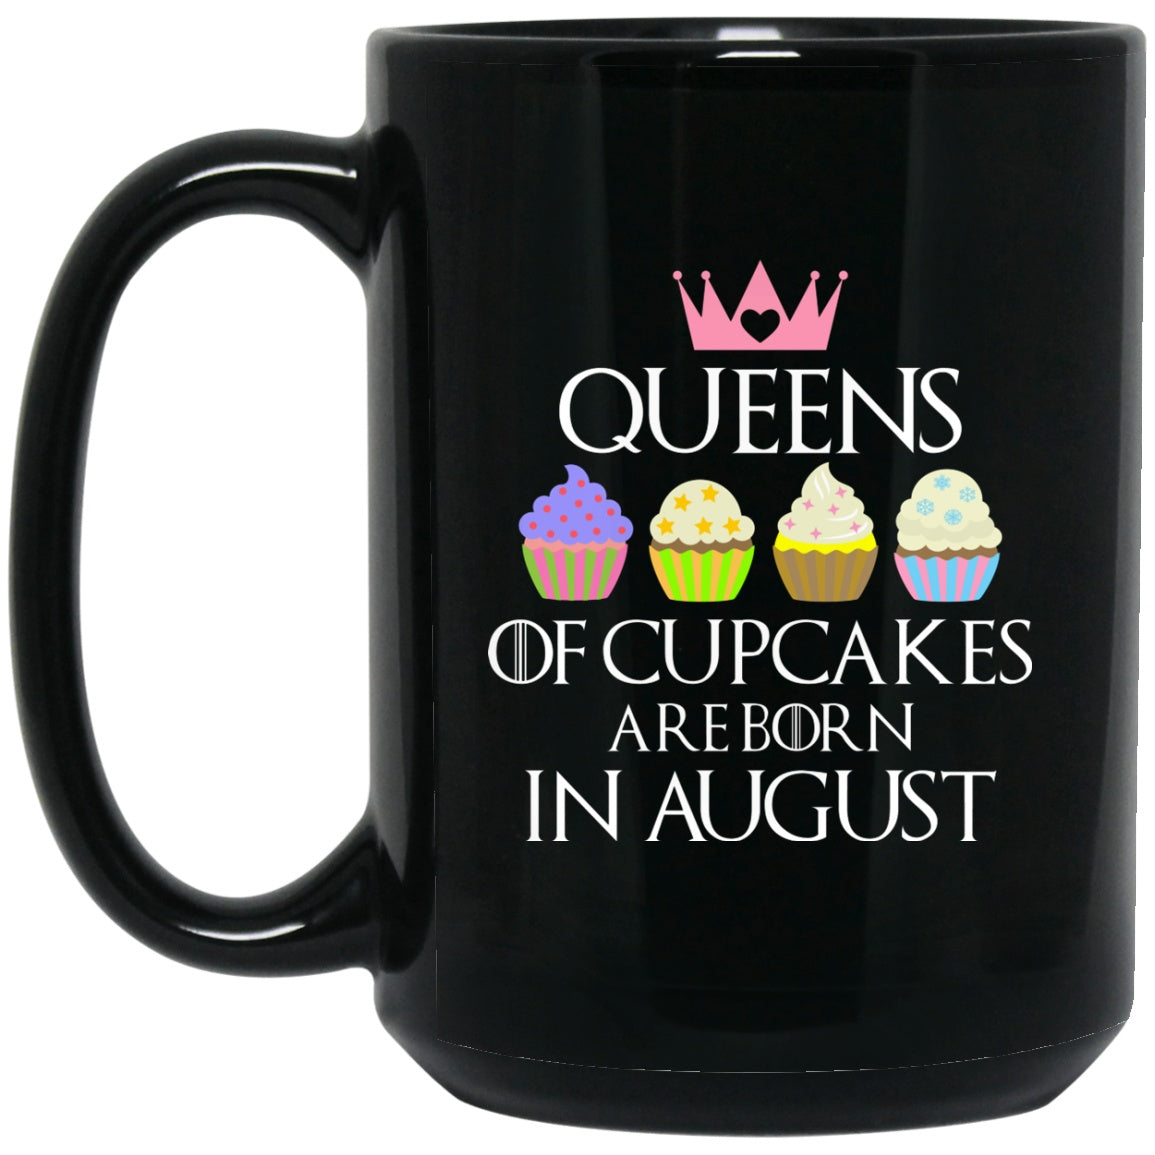 Queen of Cupcakes Born in August Black Coffee Mugs - GoneBold.gift